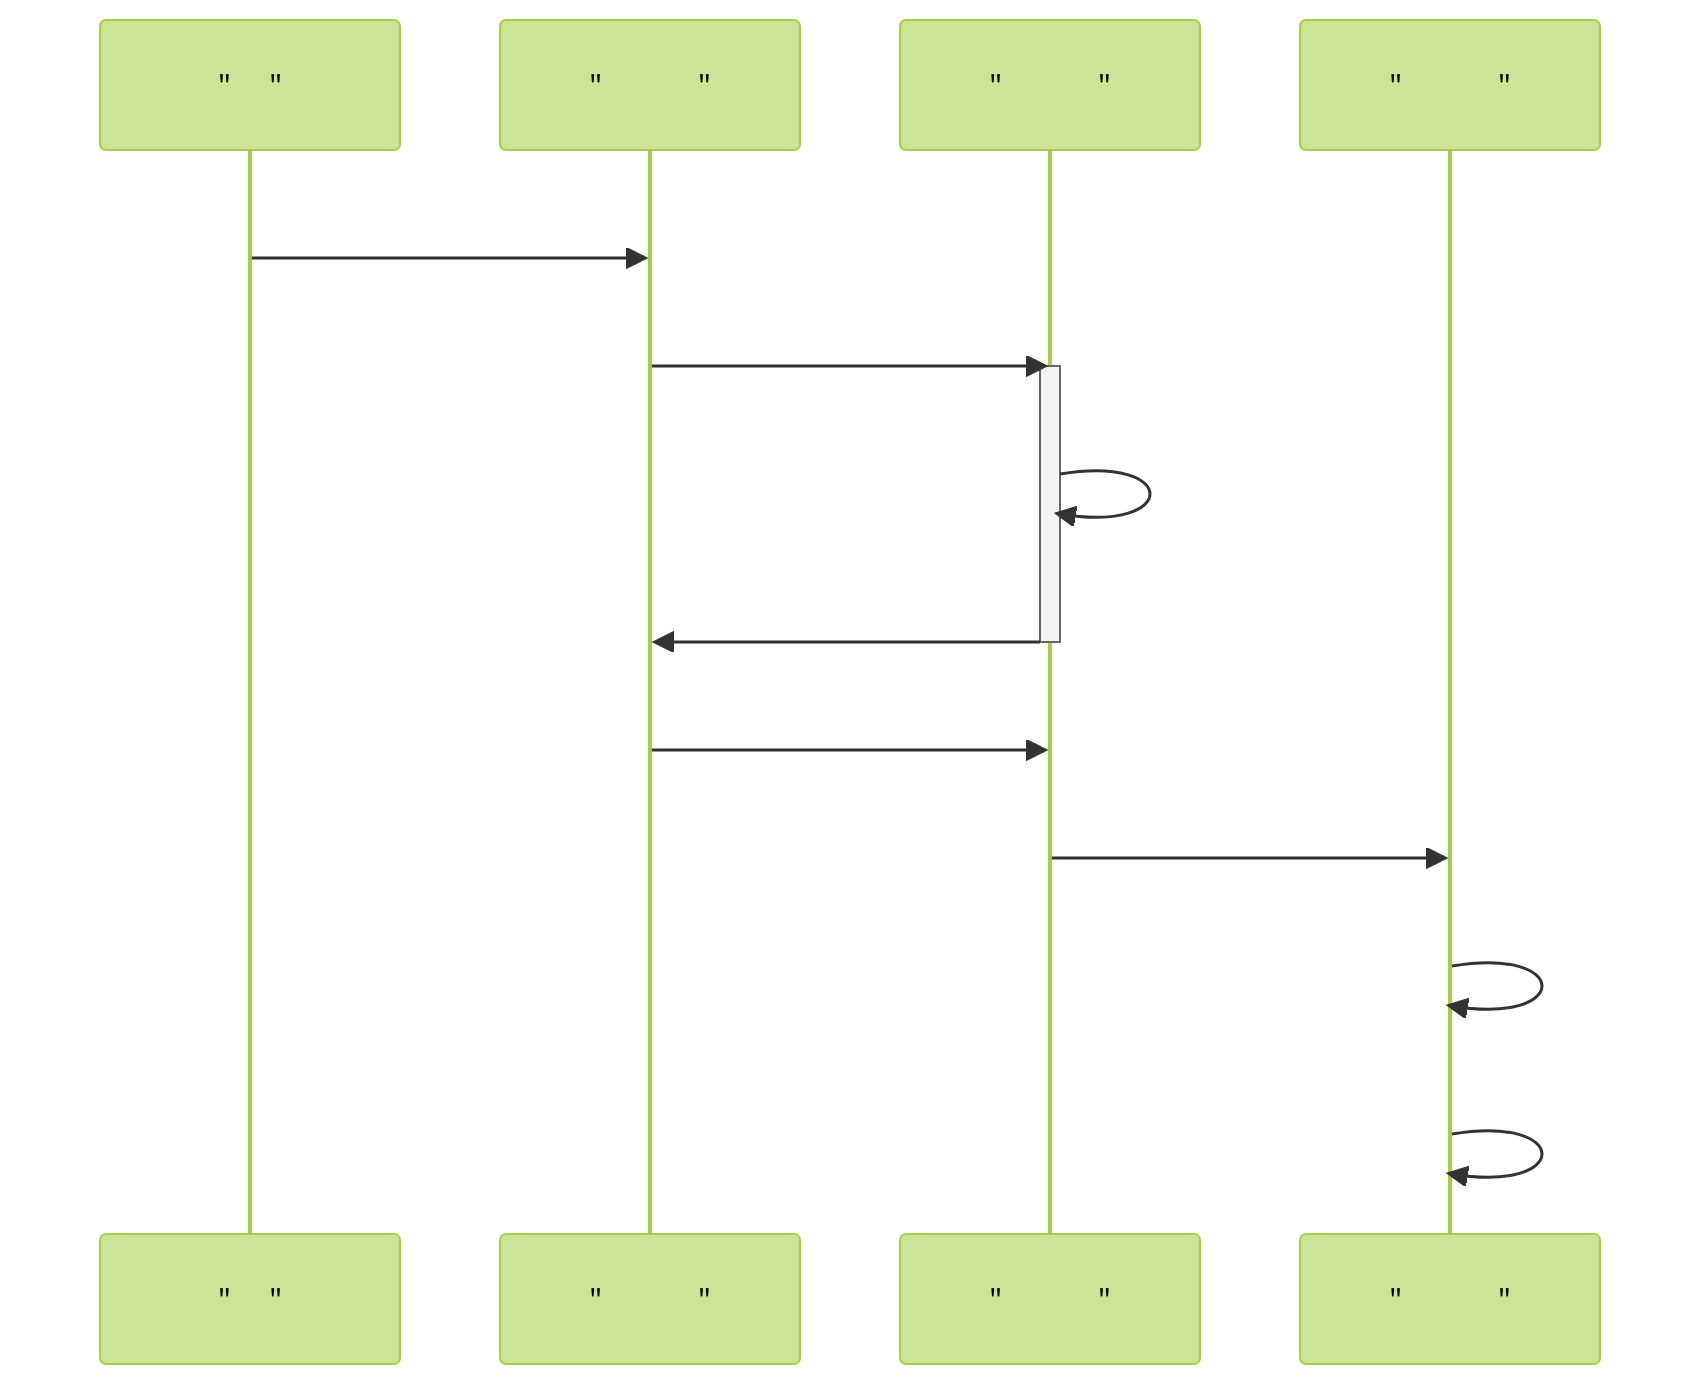 Enhanced sequence diagram of fermented cucumber pickle production in Japanese